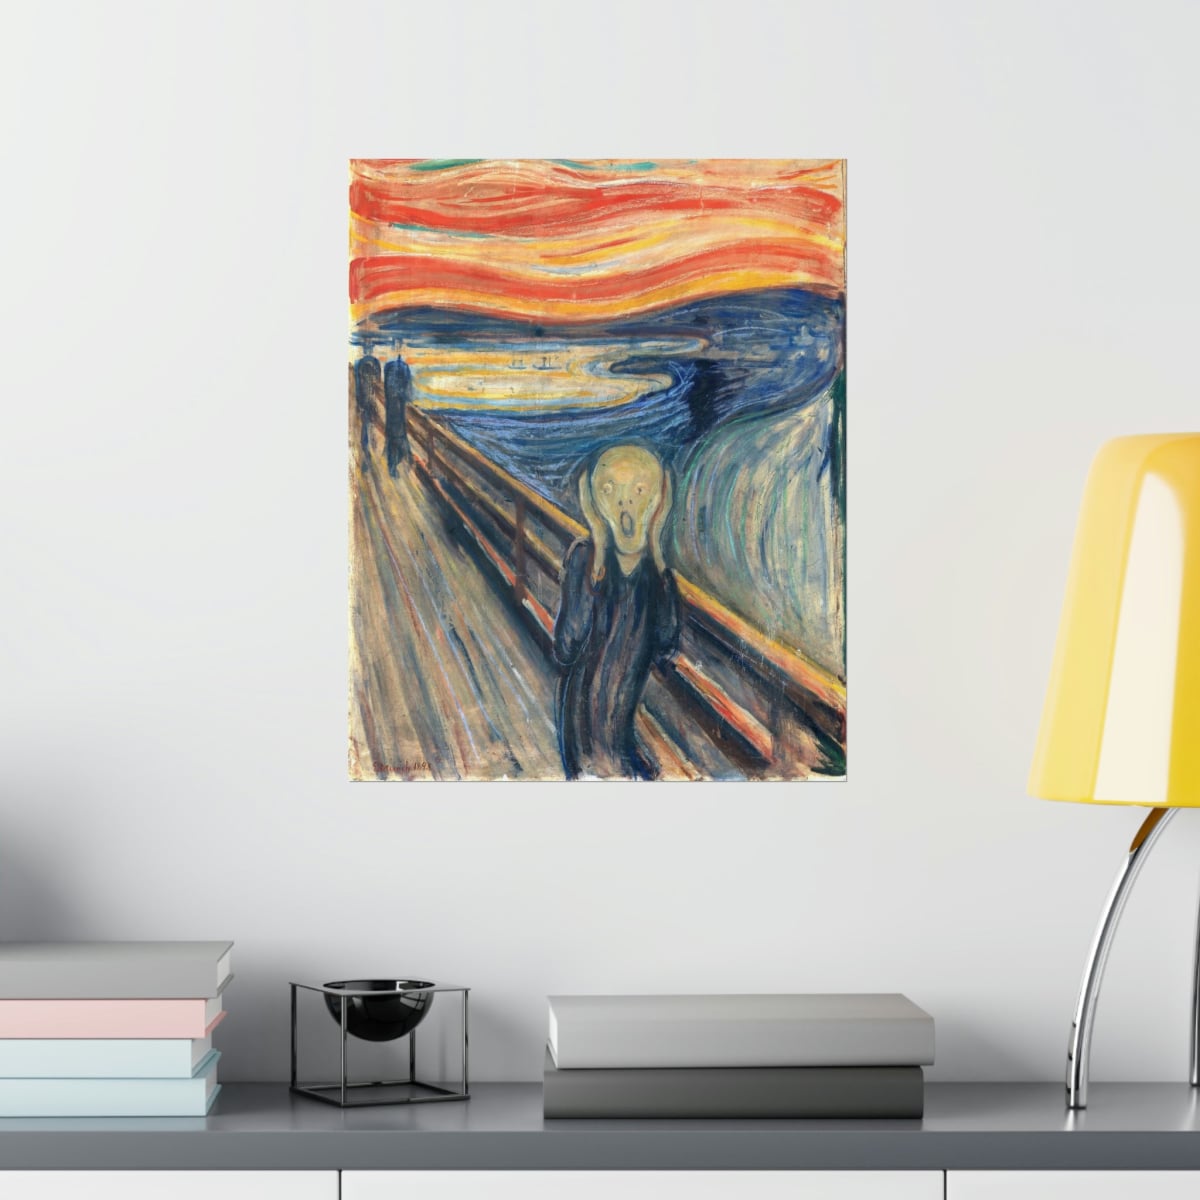 The Scream by Edvard Munch Painting Premium Posters